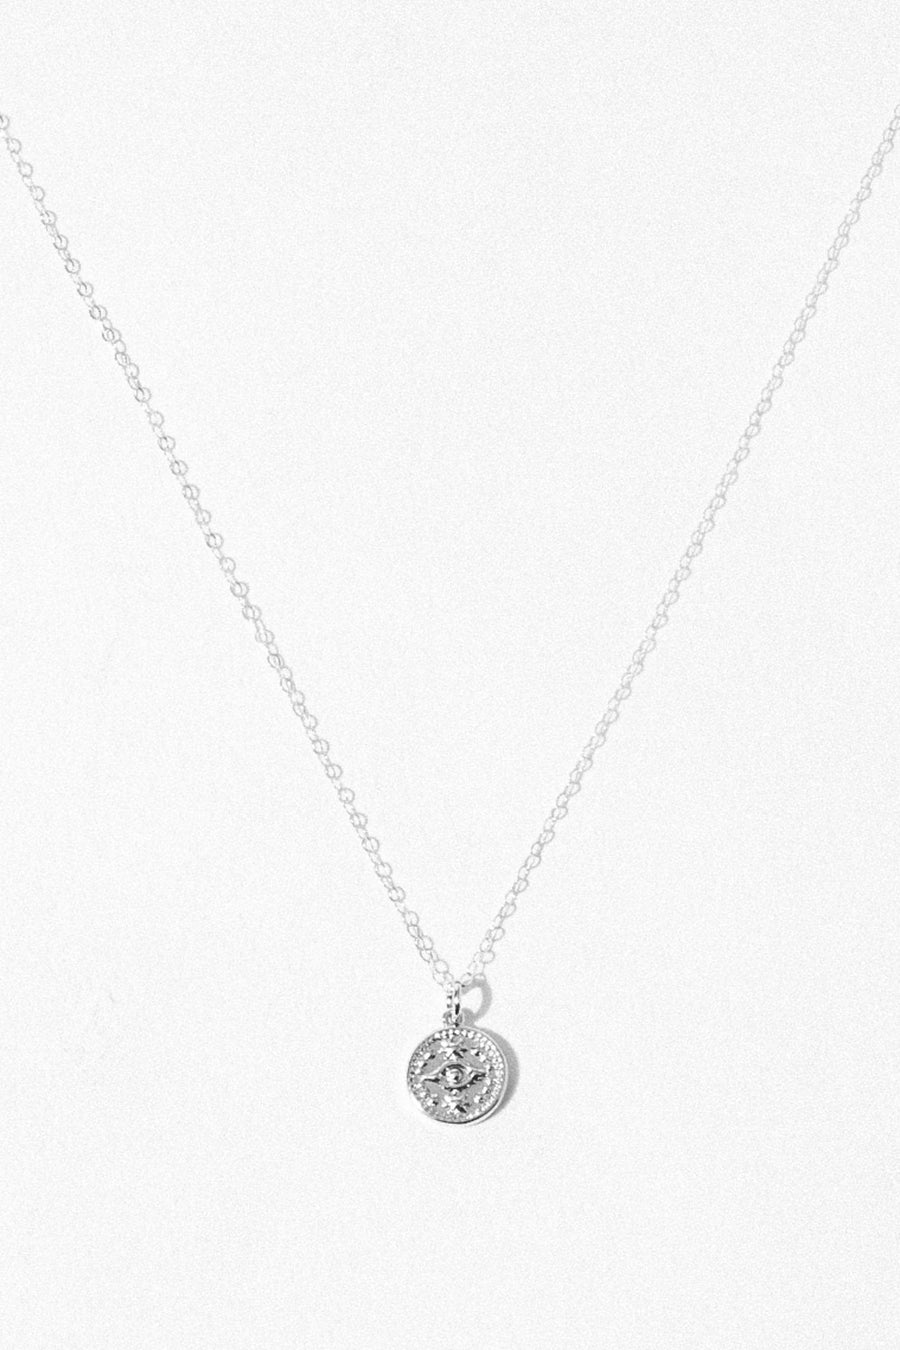 Aimvogue Jewelry 16 Inches / Silver Delicate Protection Necklace